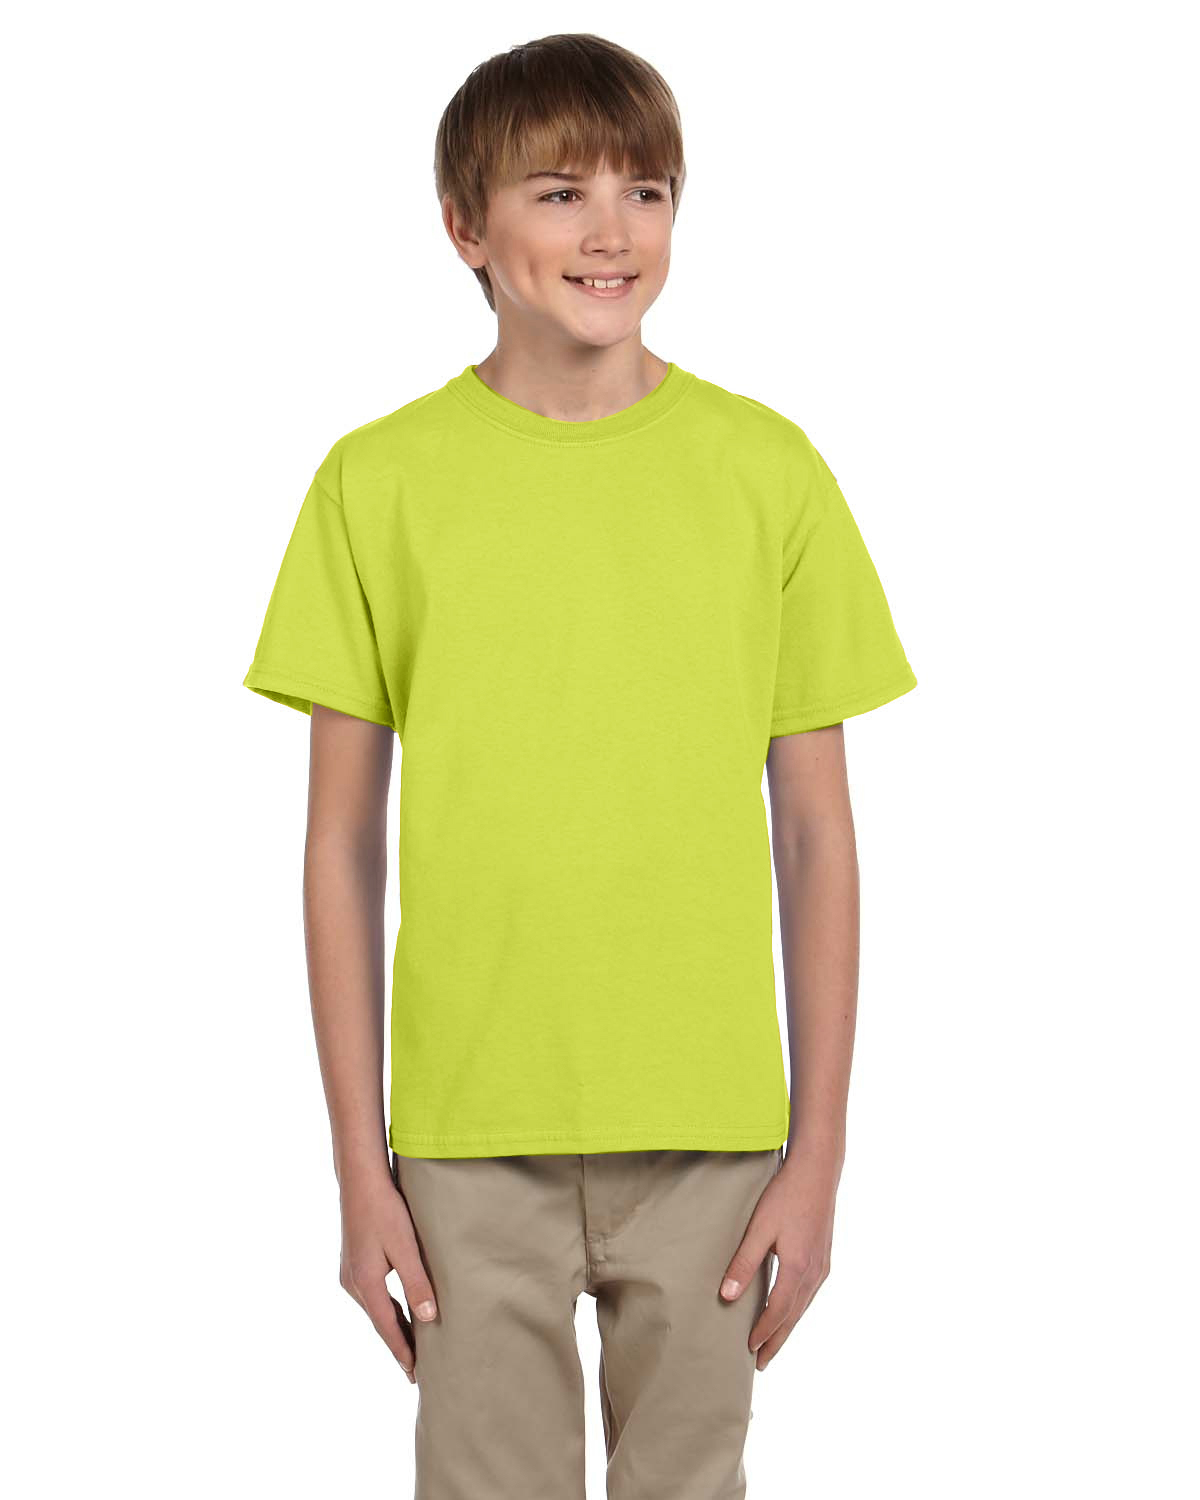 Fruit of The Loom Youth HD Cotton T-Shirt - Safety Green - M